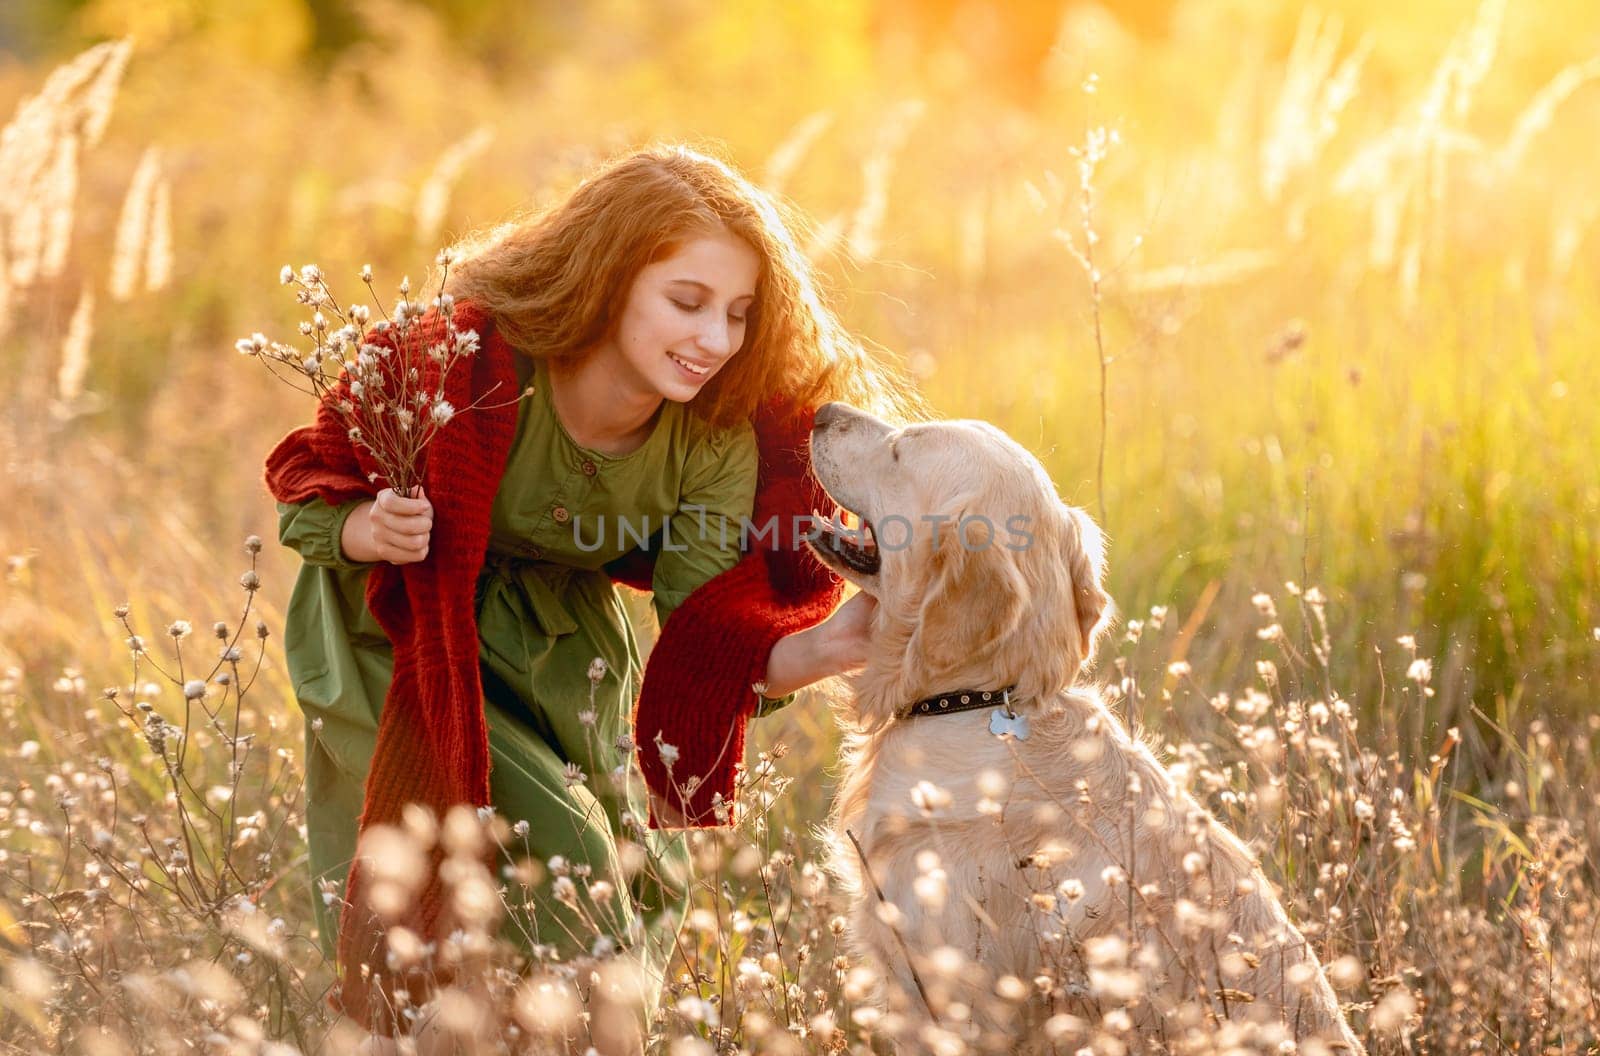 Young girl with field flowers petting golden retriever dog in middle of autumn nature